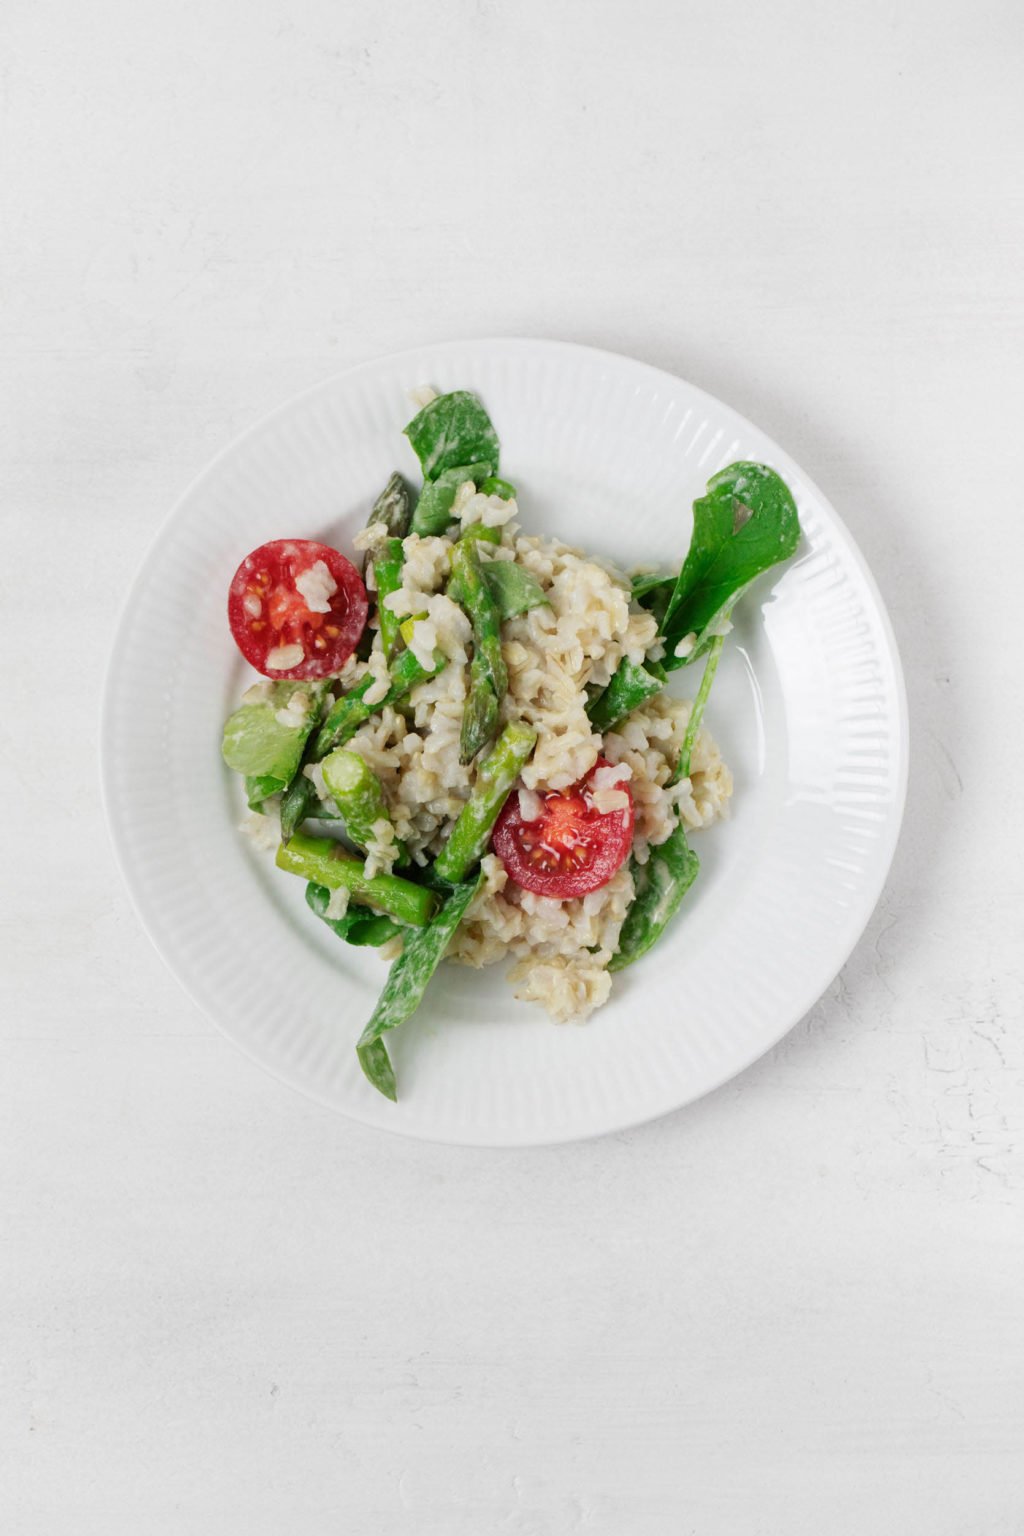 A round, white rimmed plate has been filled with a brown rice and spinach salad. It rests on a white surface.